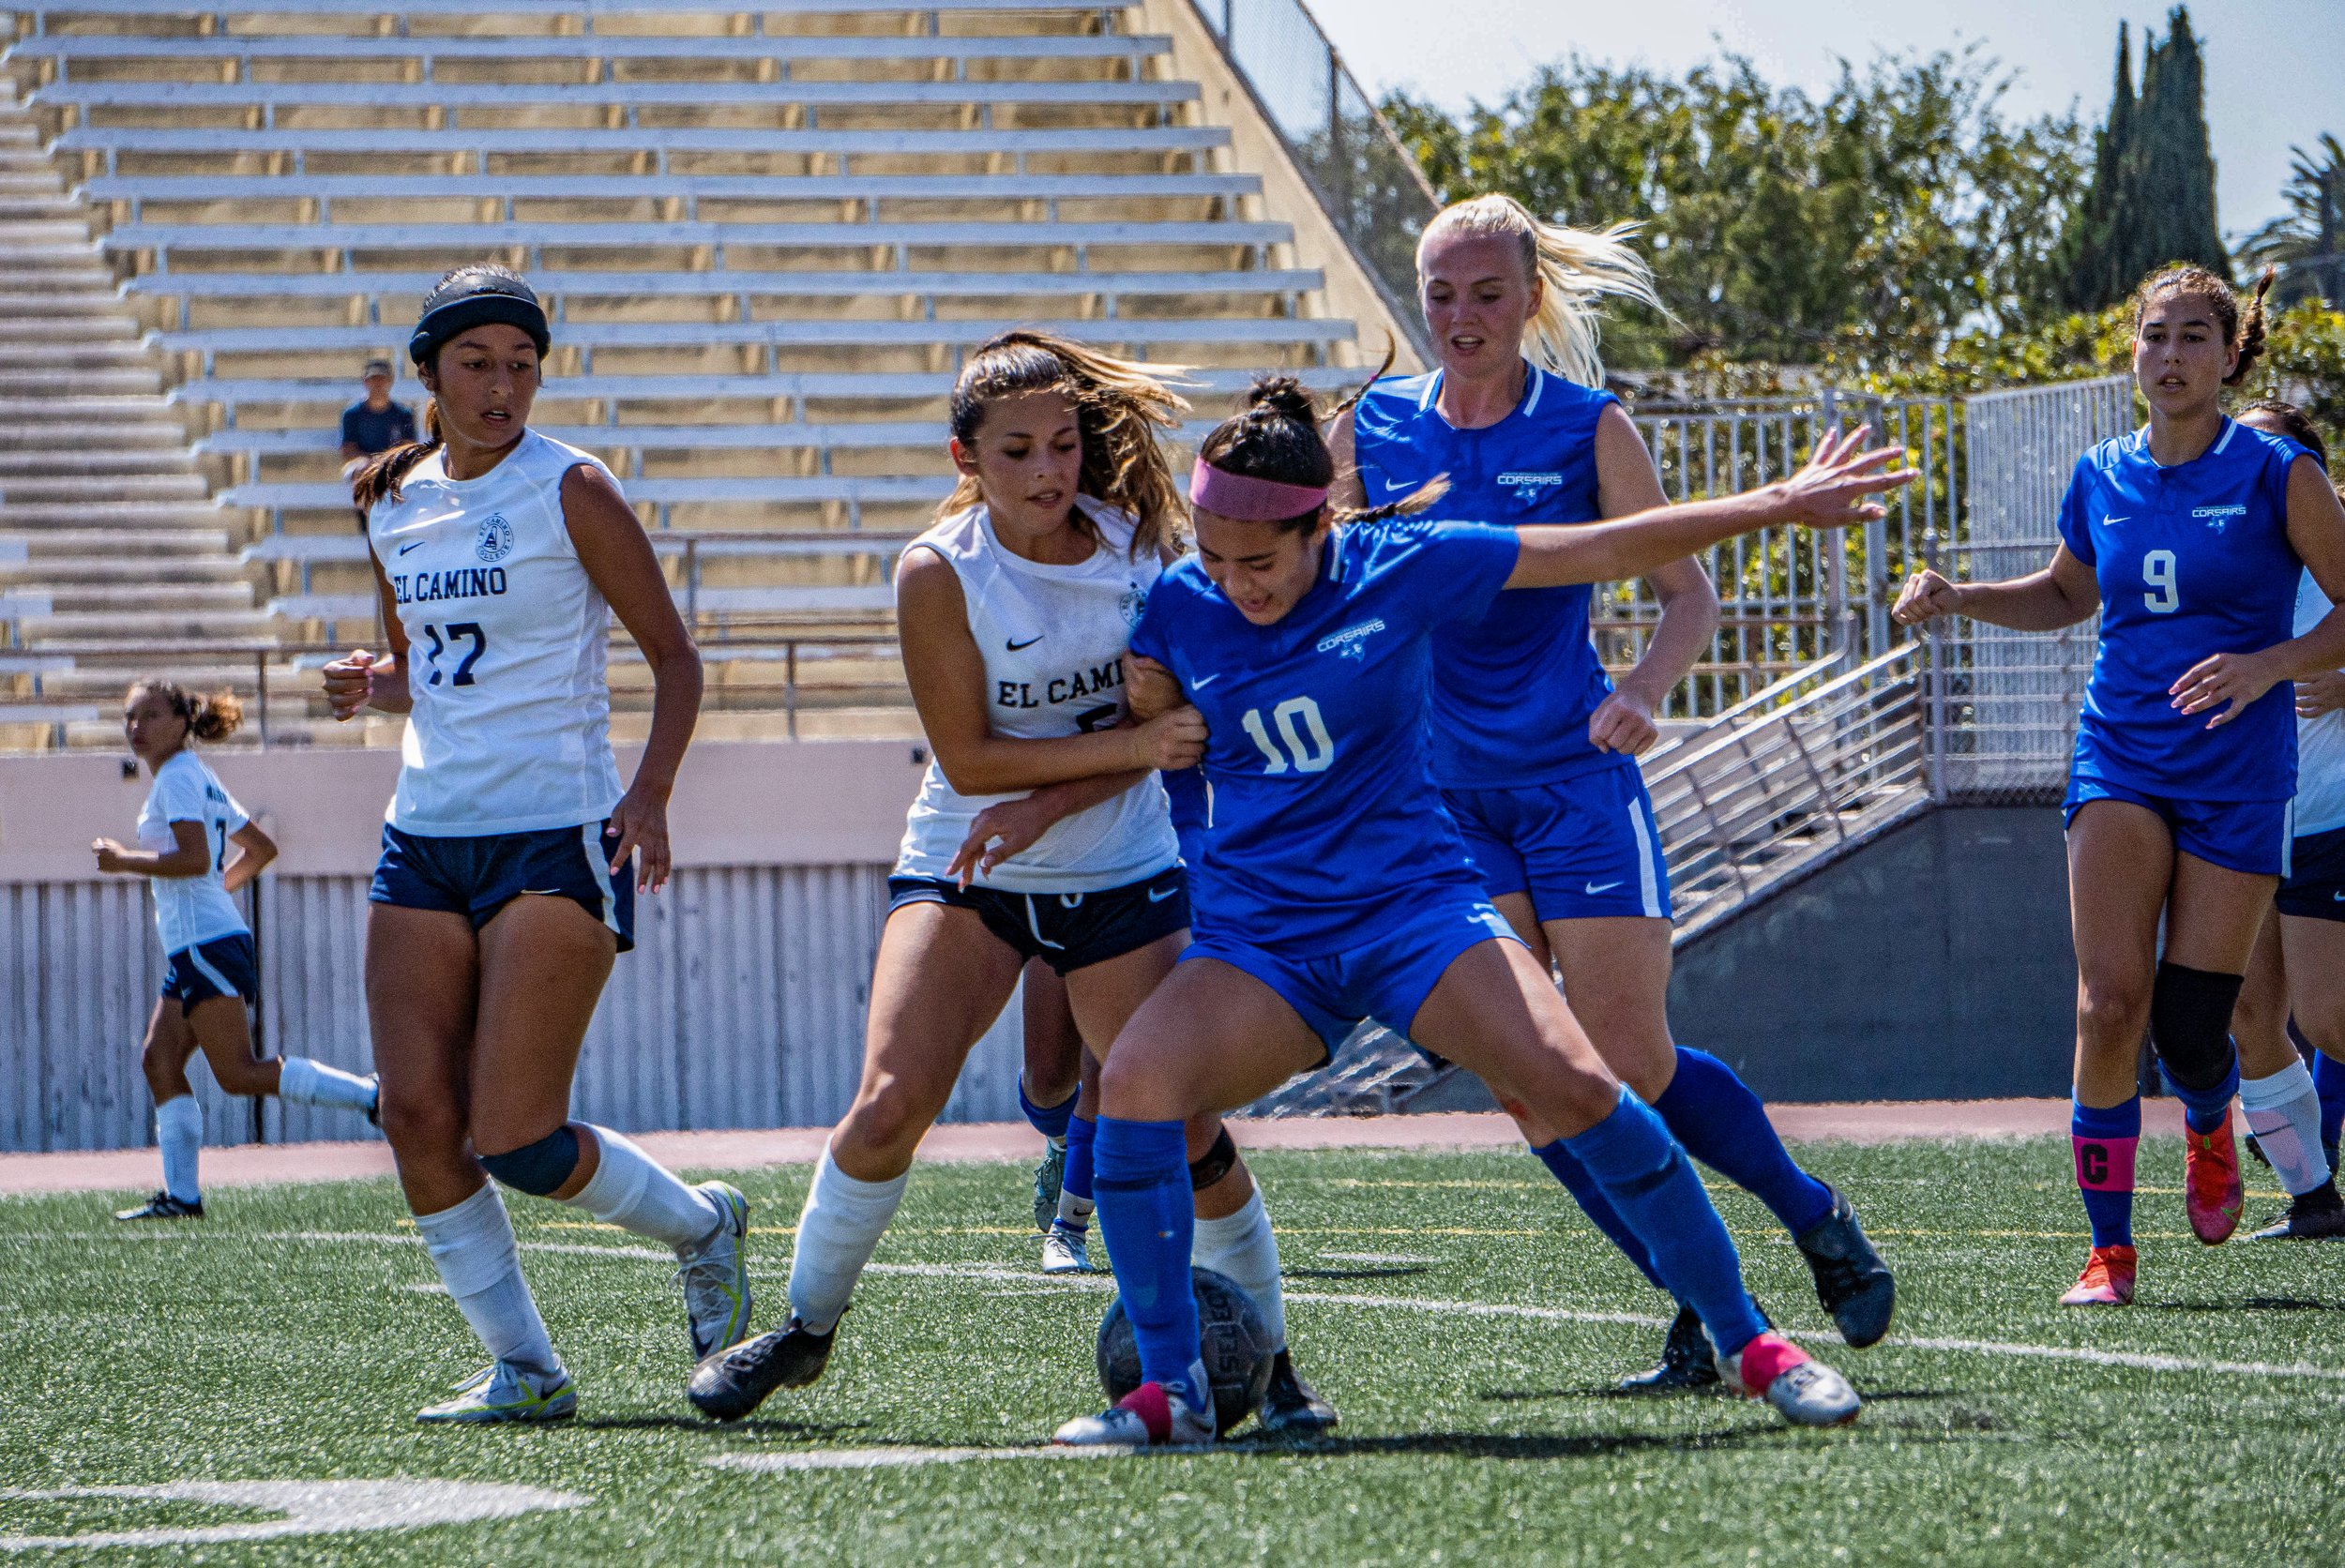  Women's Corsair midfielder Ali Alban (10) is grappled by El Camino Warrior defender Alexis Perez-Fonseca (5) as they fight for the ball. The Corsair Field in Santa Monica, Calif. On Friday, September 2, 2022. (Tsen Ee Lin | The Corsair) 